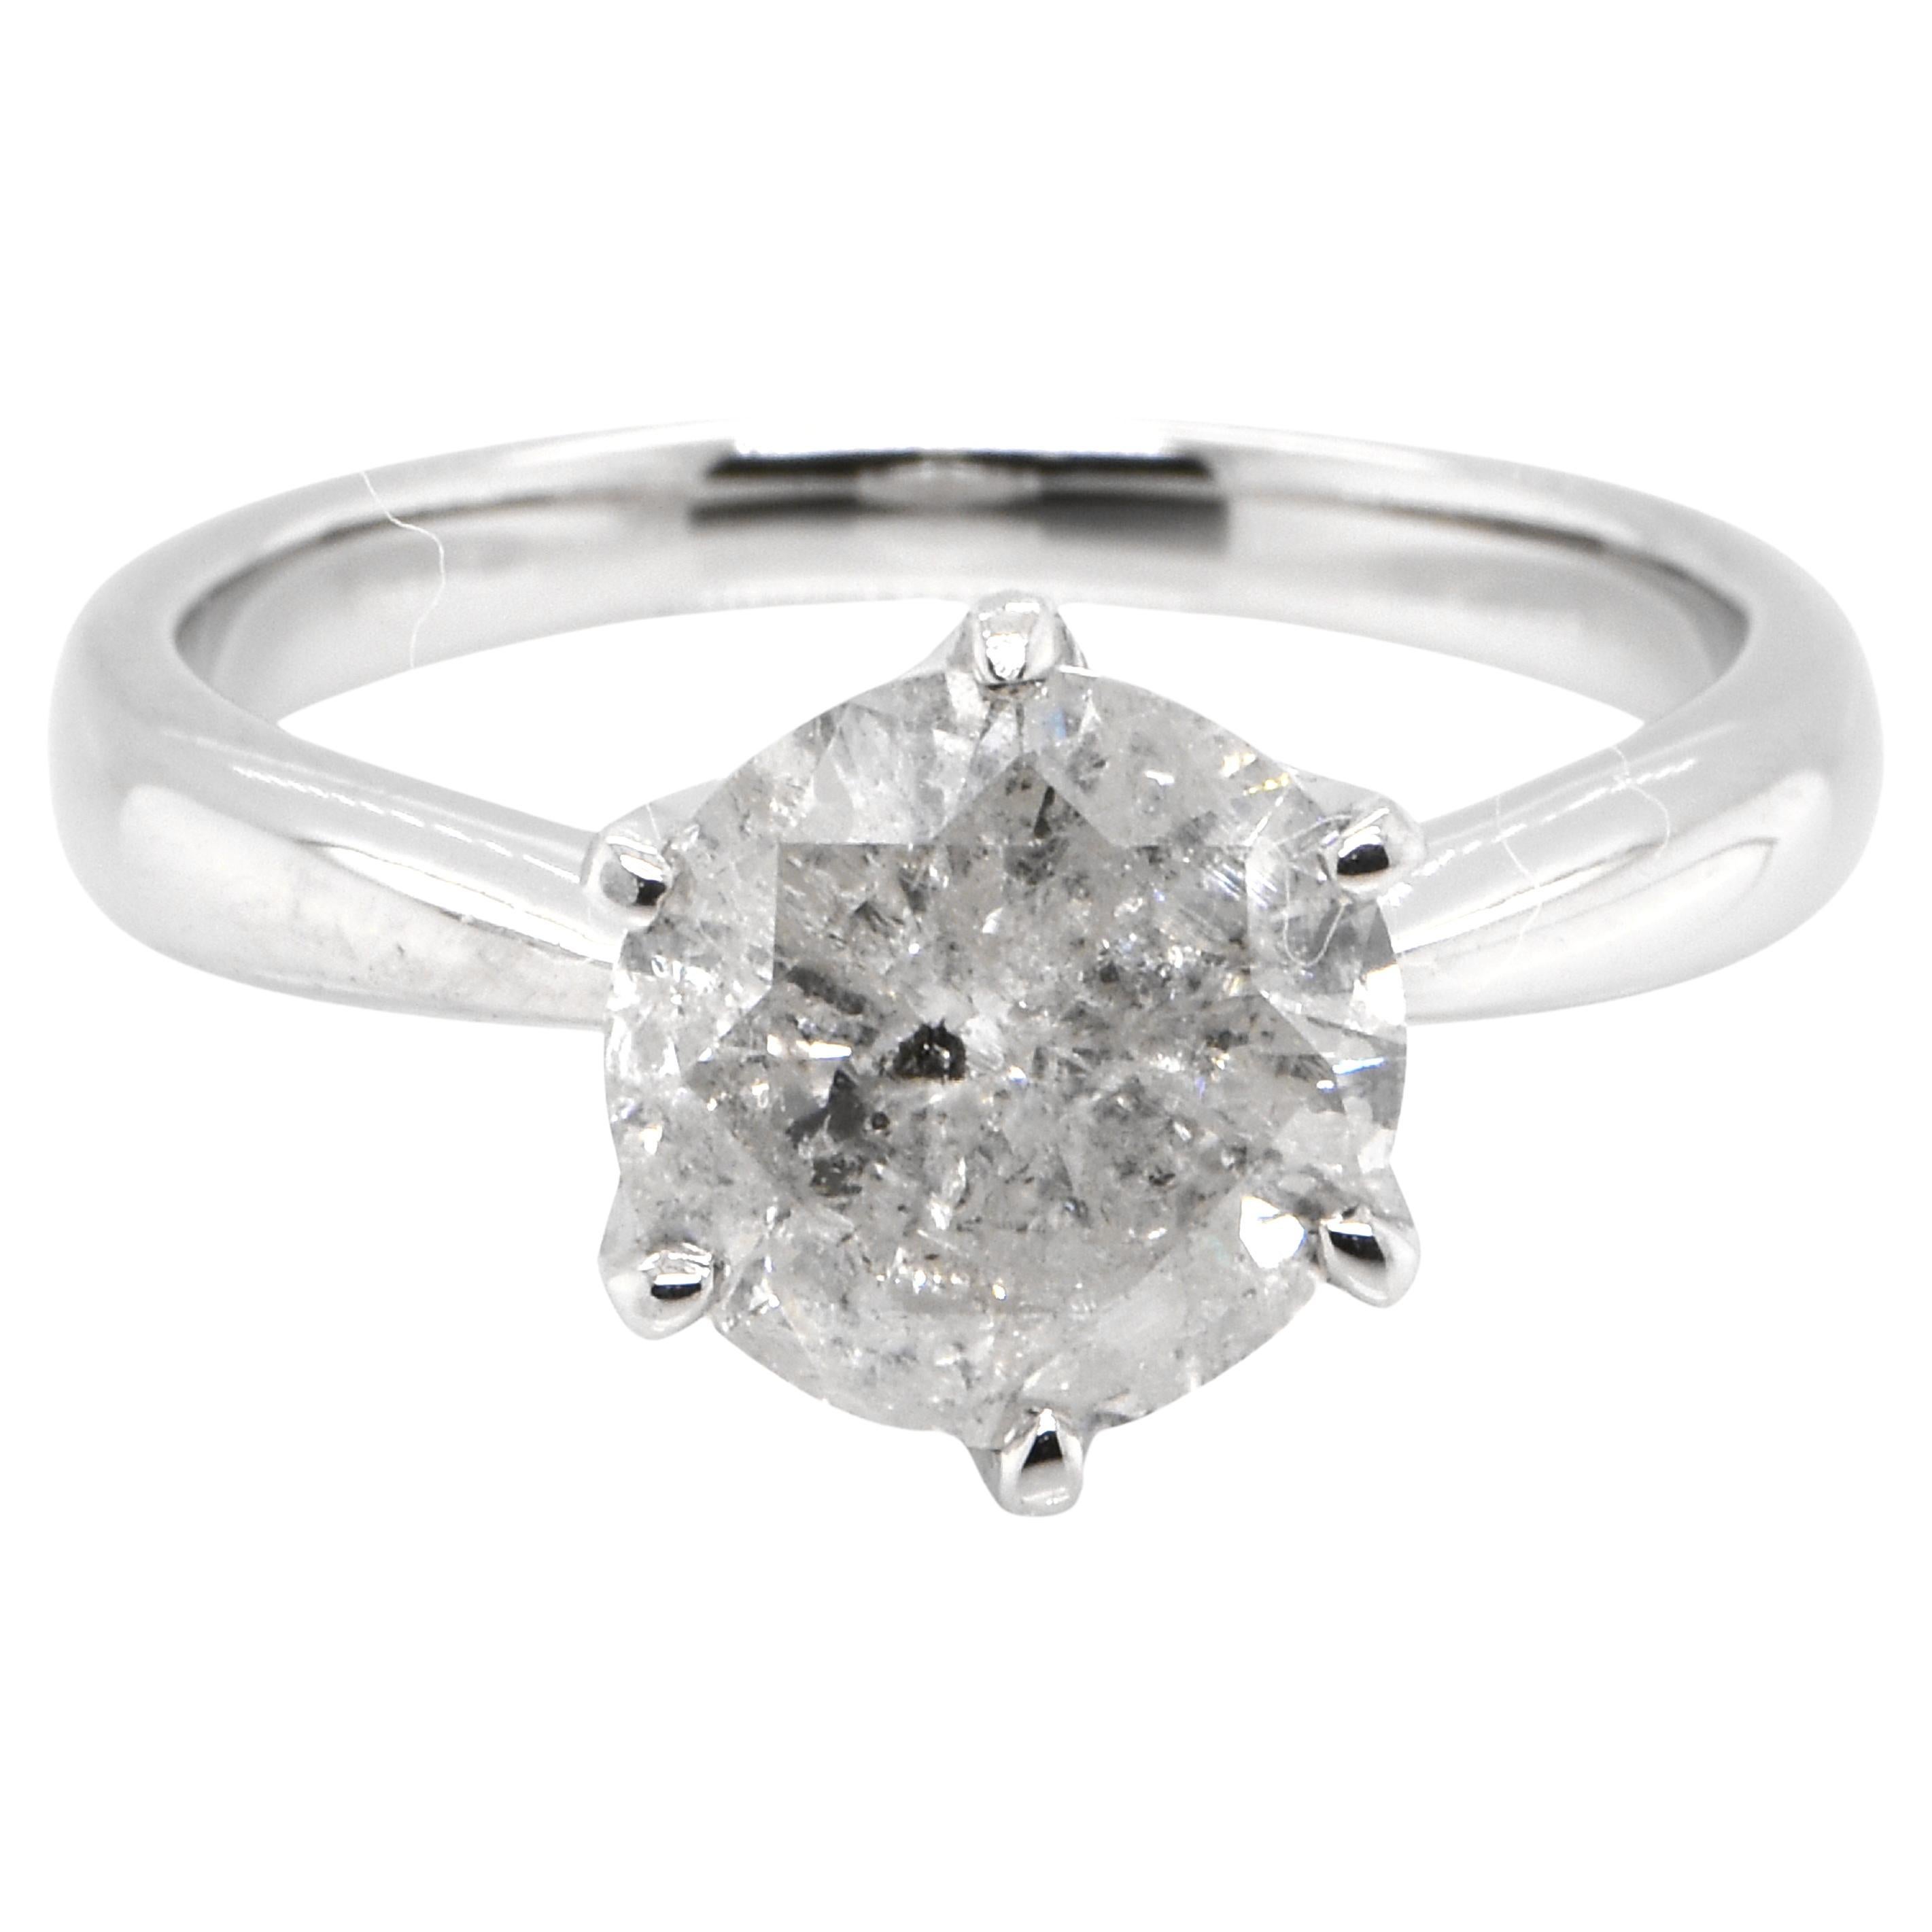 2.08 Carat Natural "Salt and Pepper" Diamond Solitaire Ring Made in Platinum